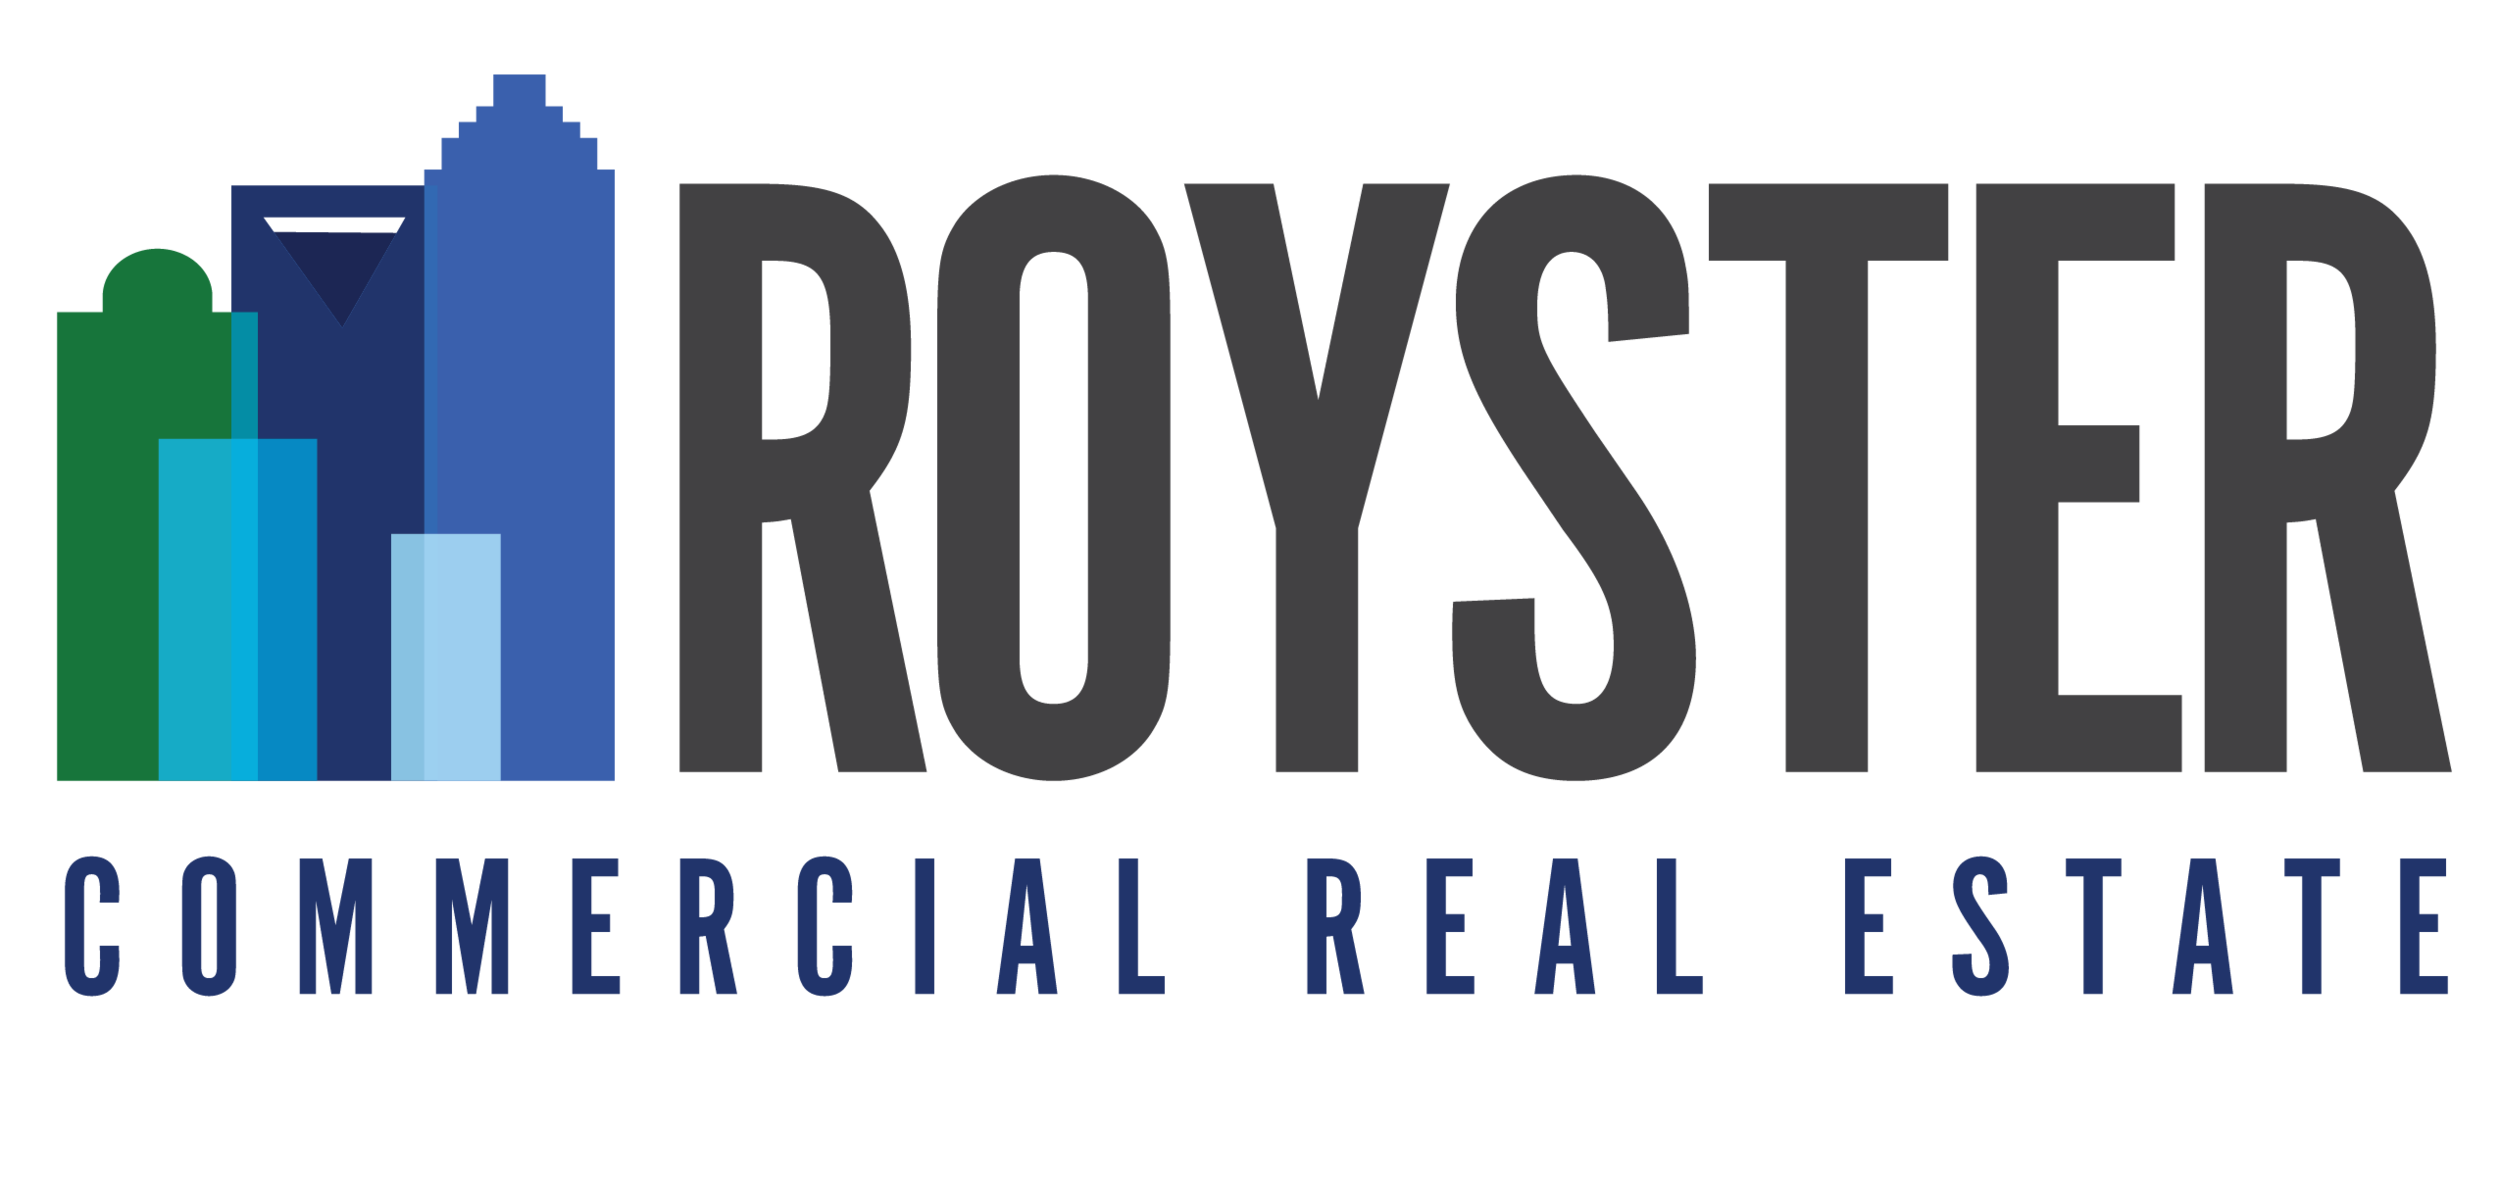 Royster Commercial Real Estate